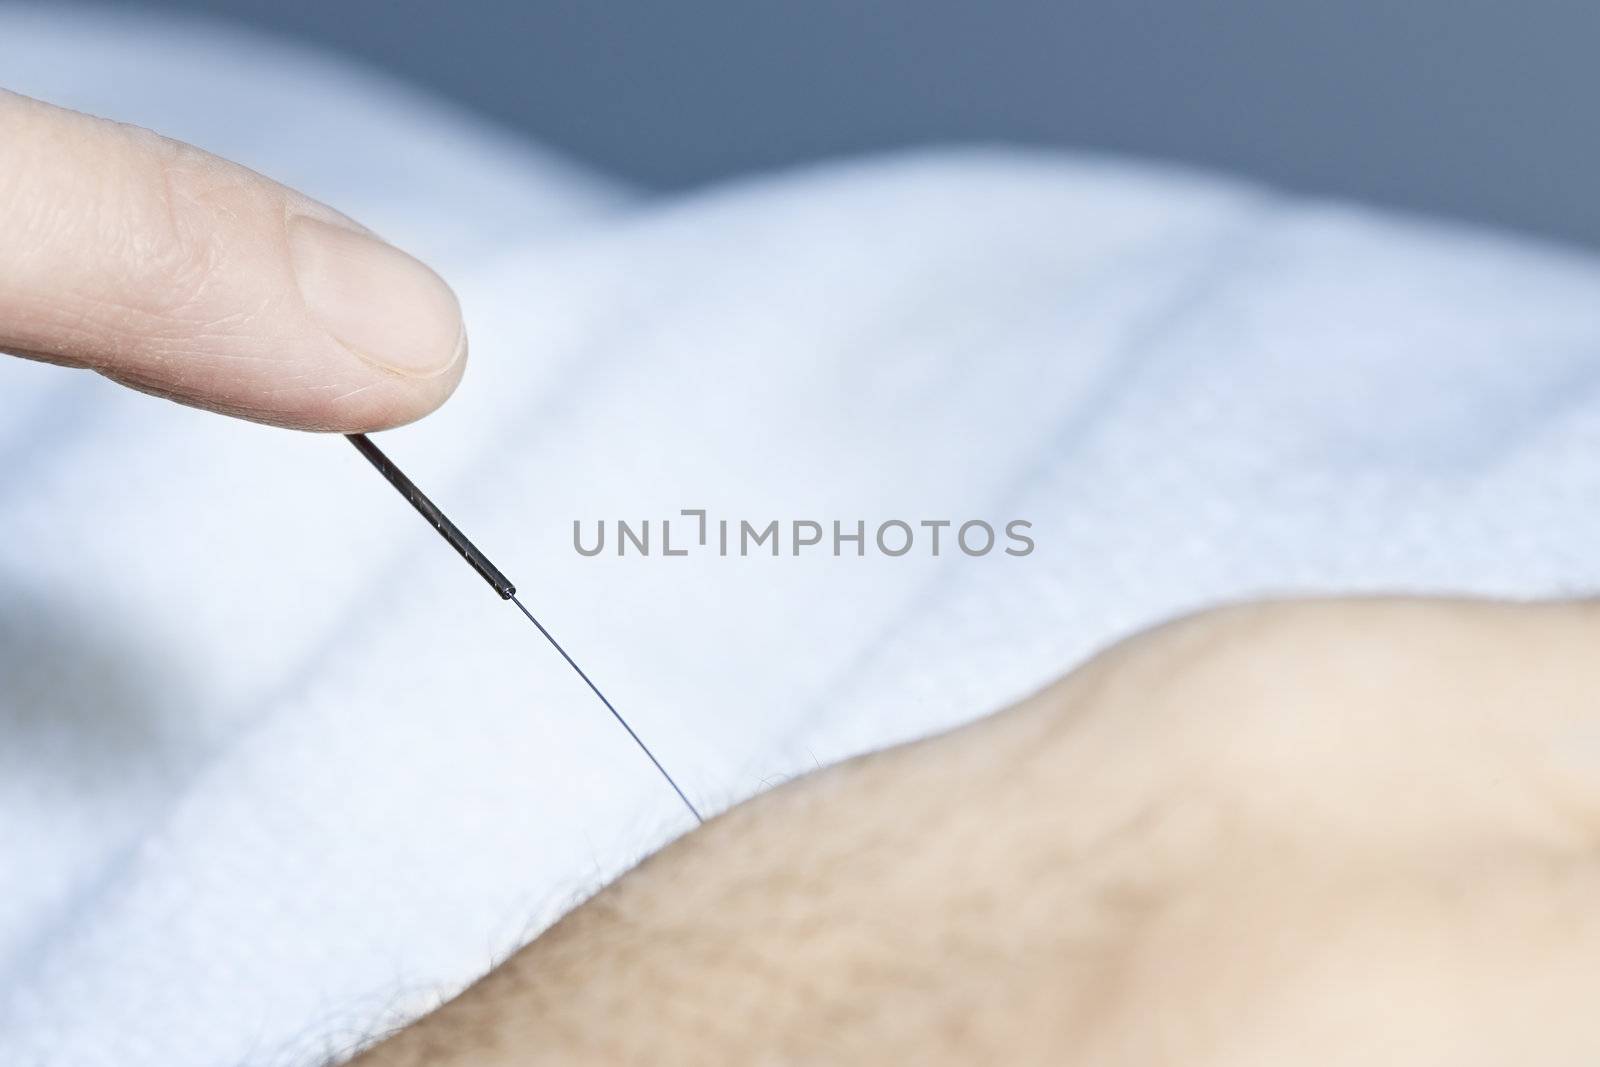 Manipulation of acupuncture needle inserted in hand